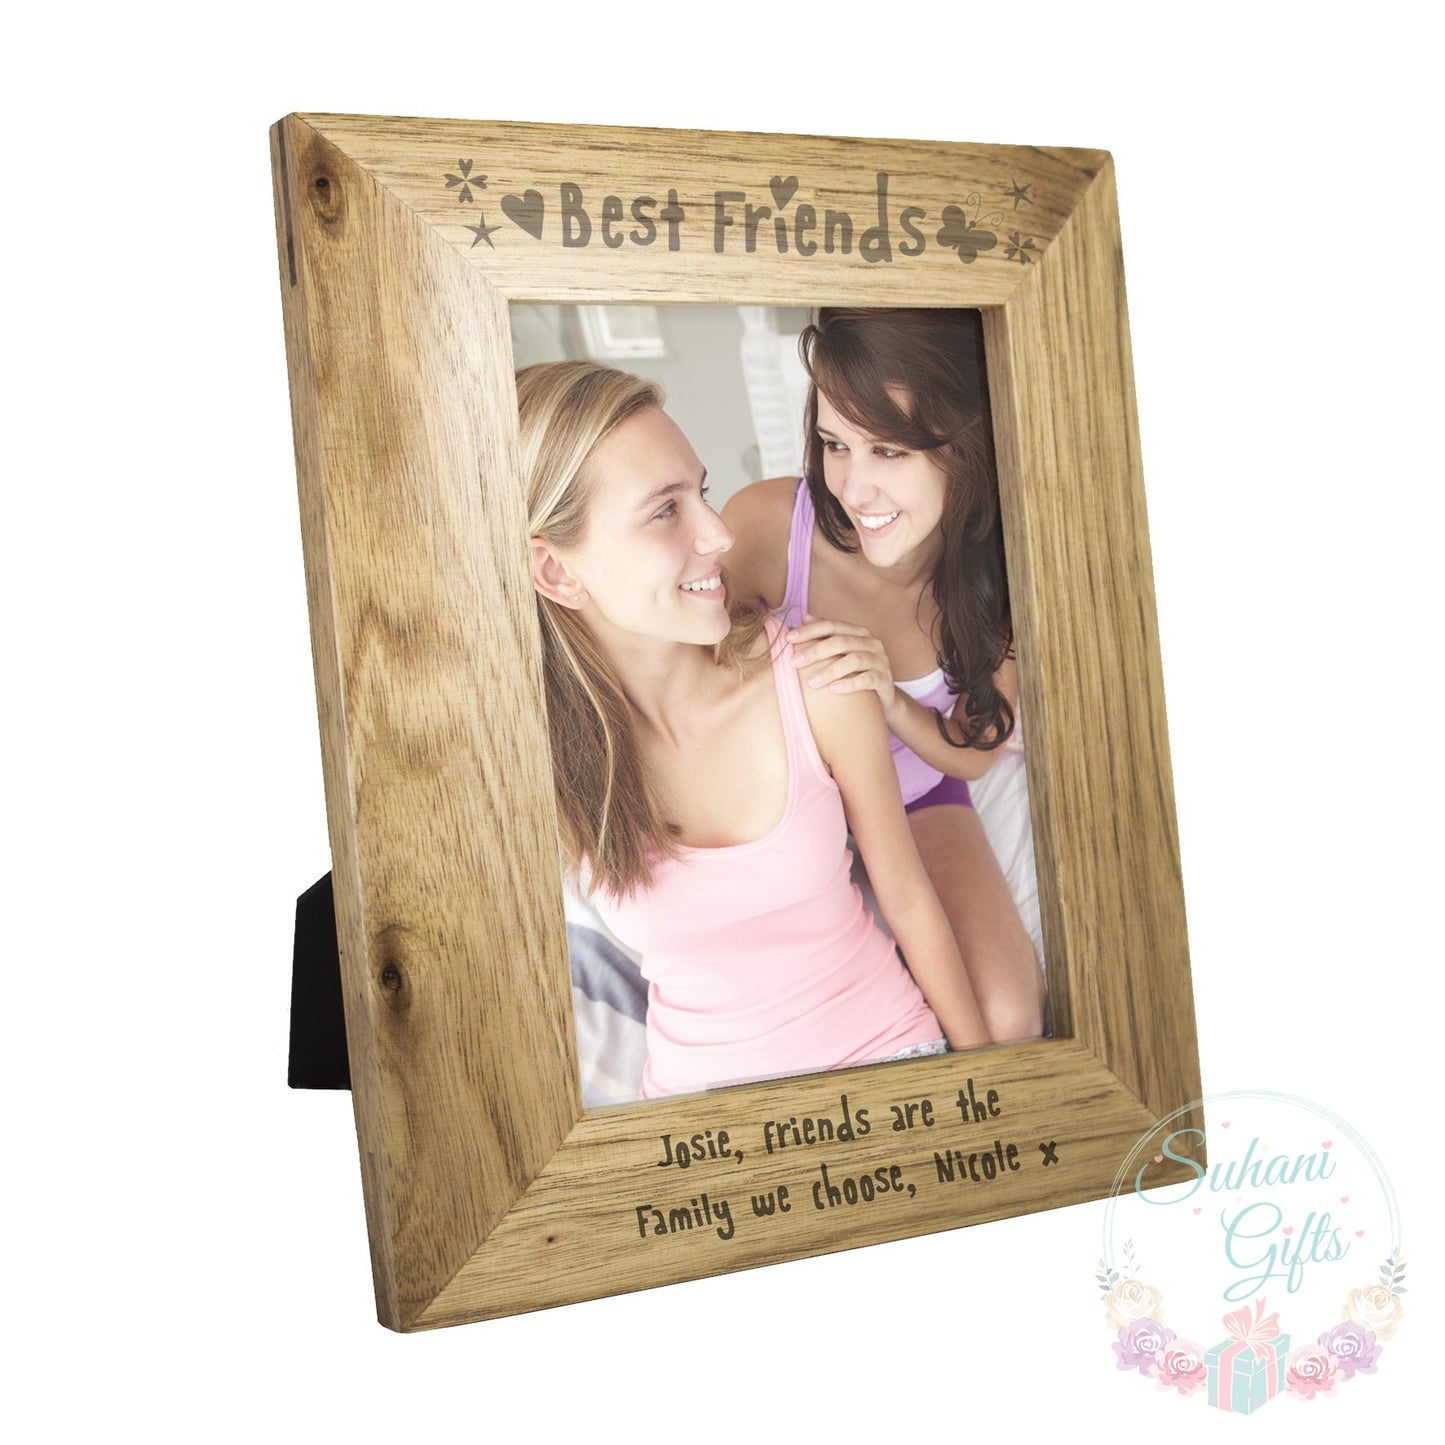 Personalised Best Friends 5x7 Wooden Photo Frame - Suhani Gifts